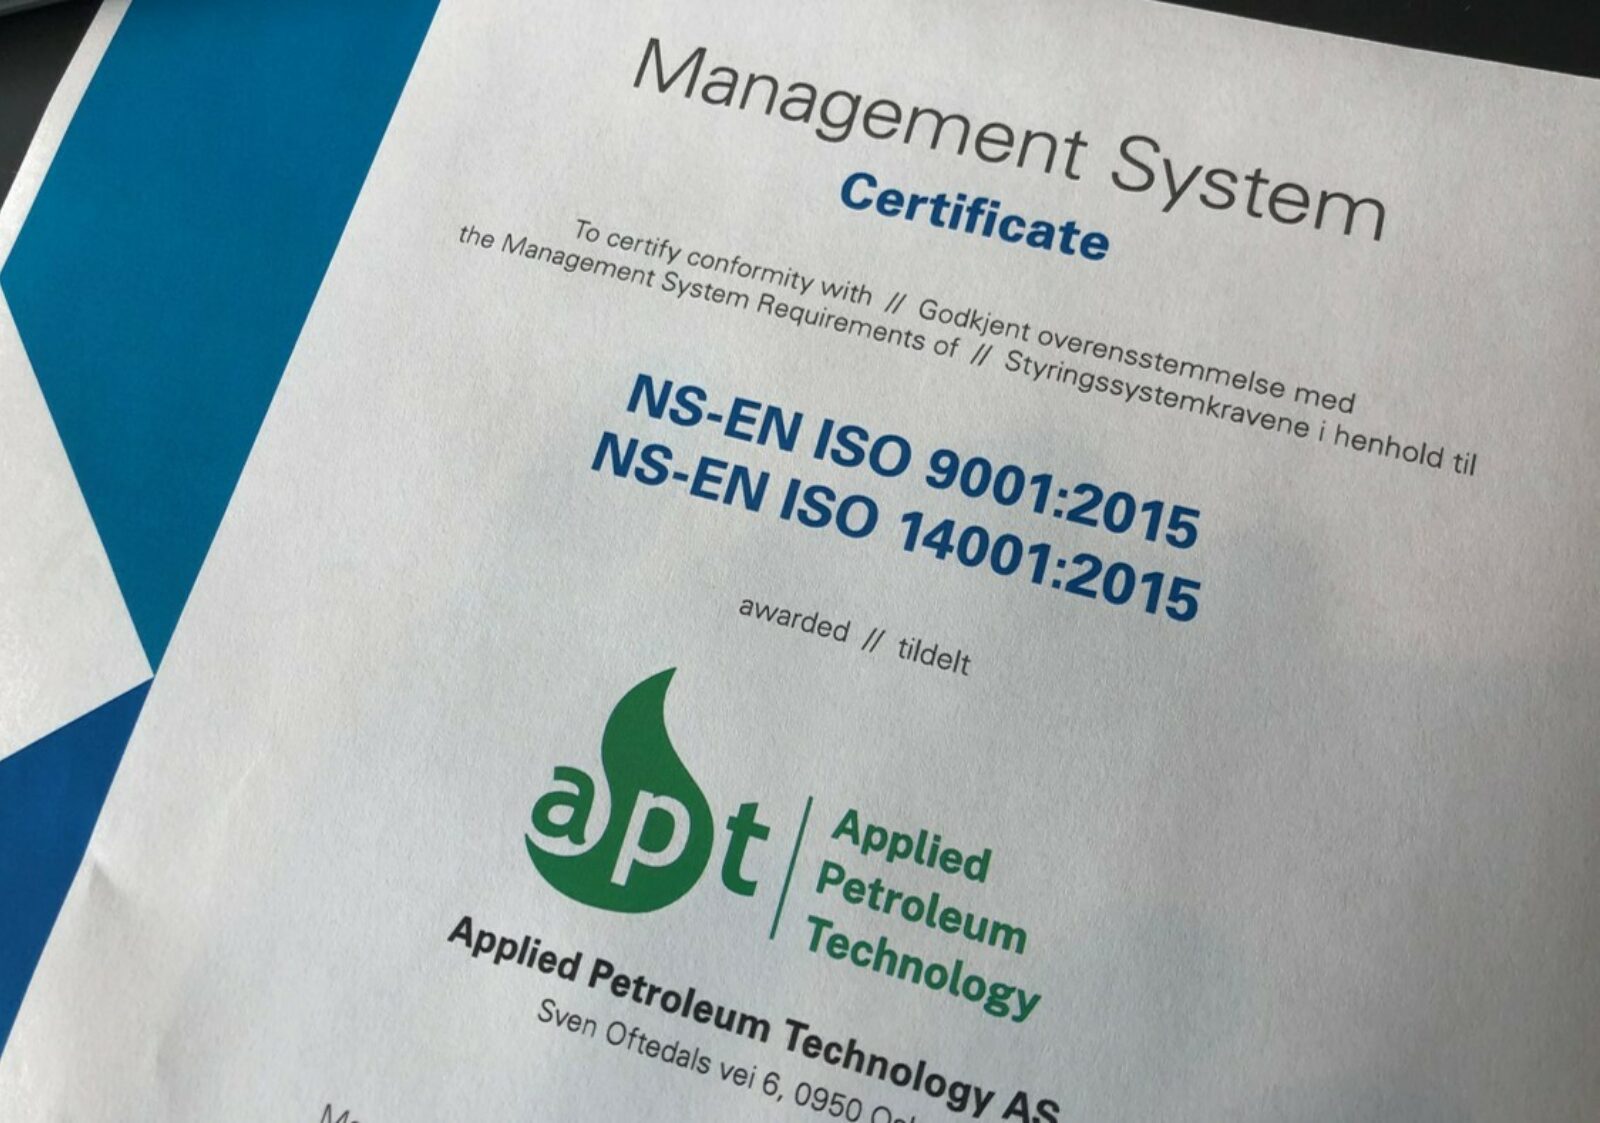 ISO 9001:2015 and ISO 14001:2015 management system certificate